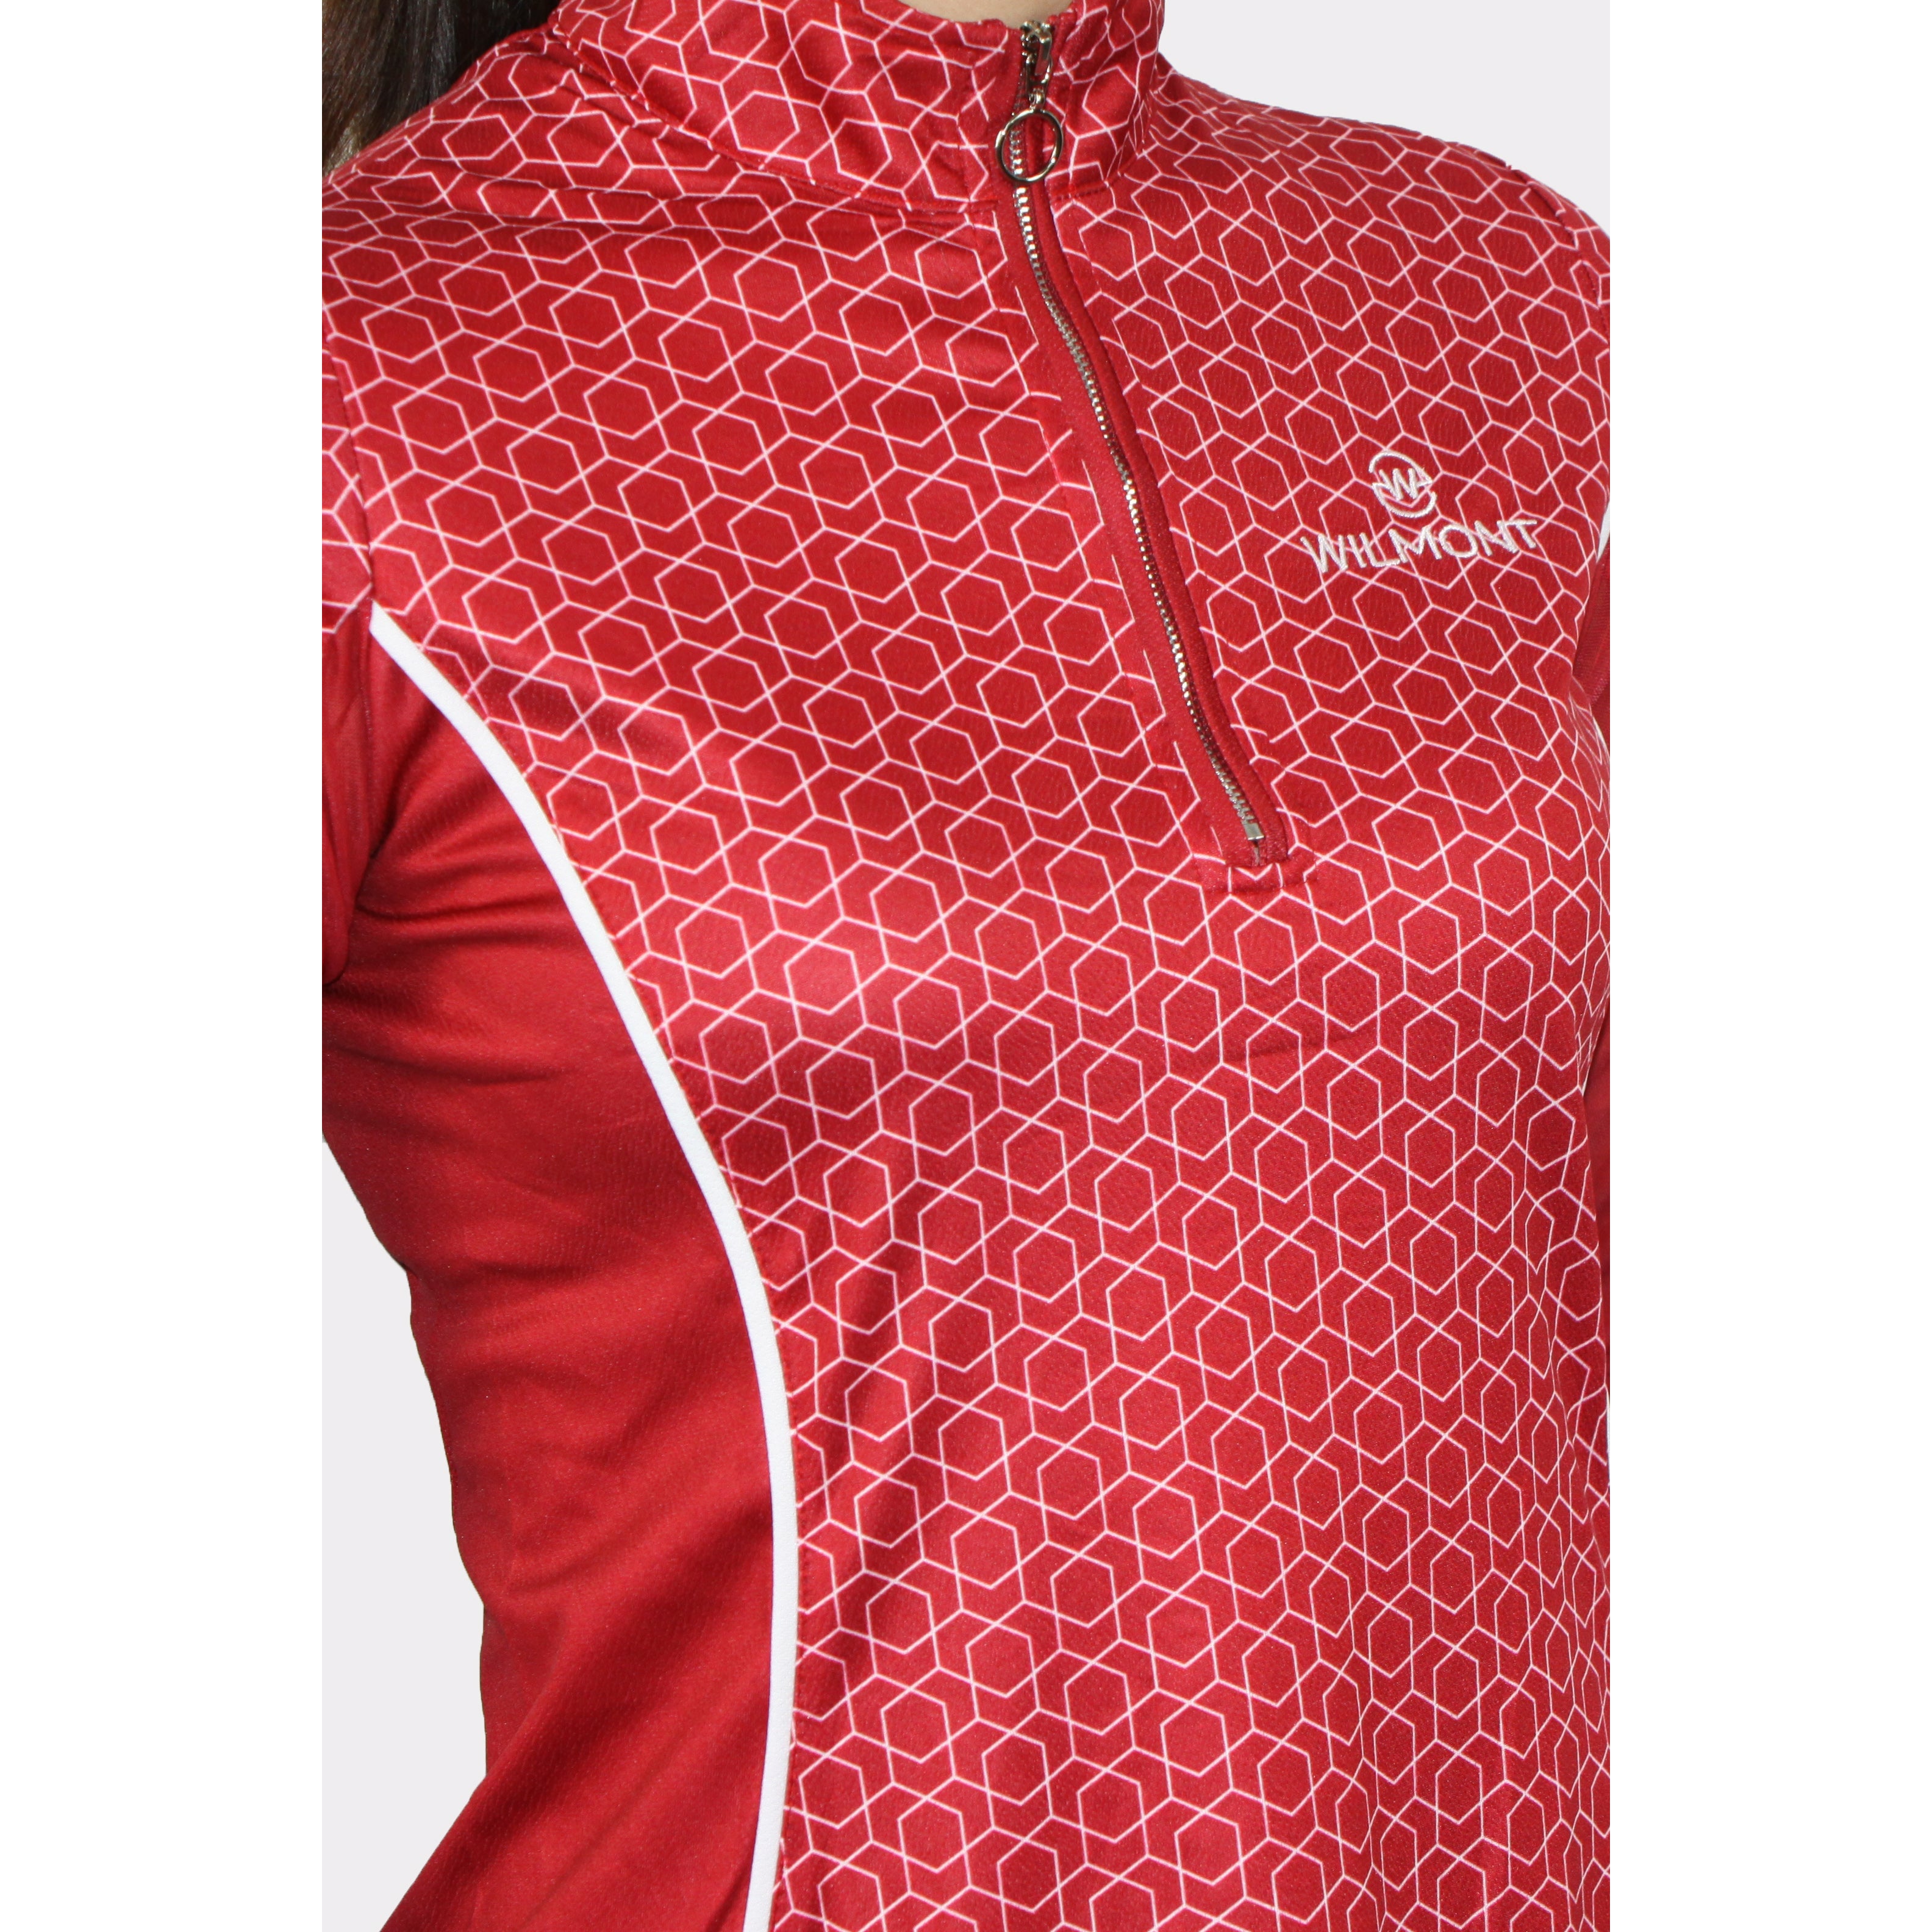 Equestrian Sunshirt -Red and white